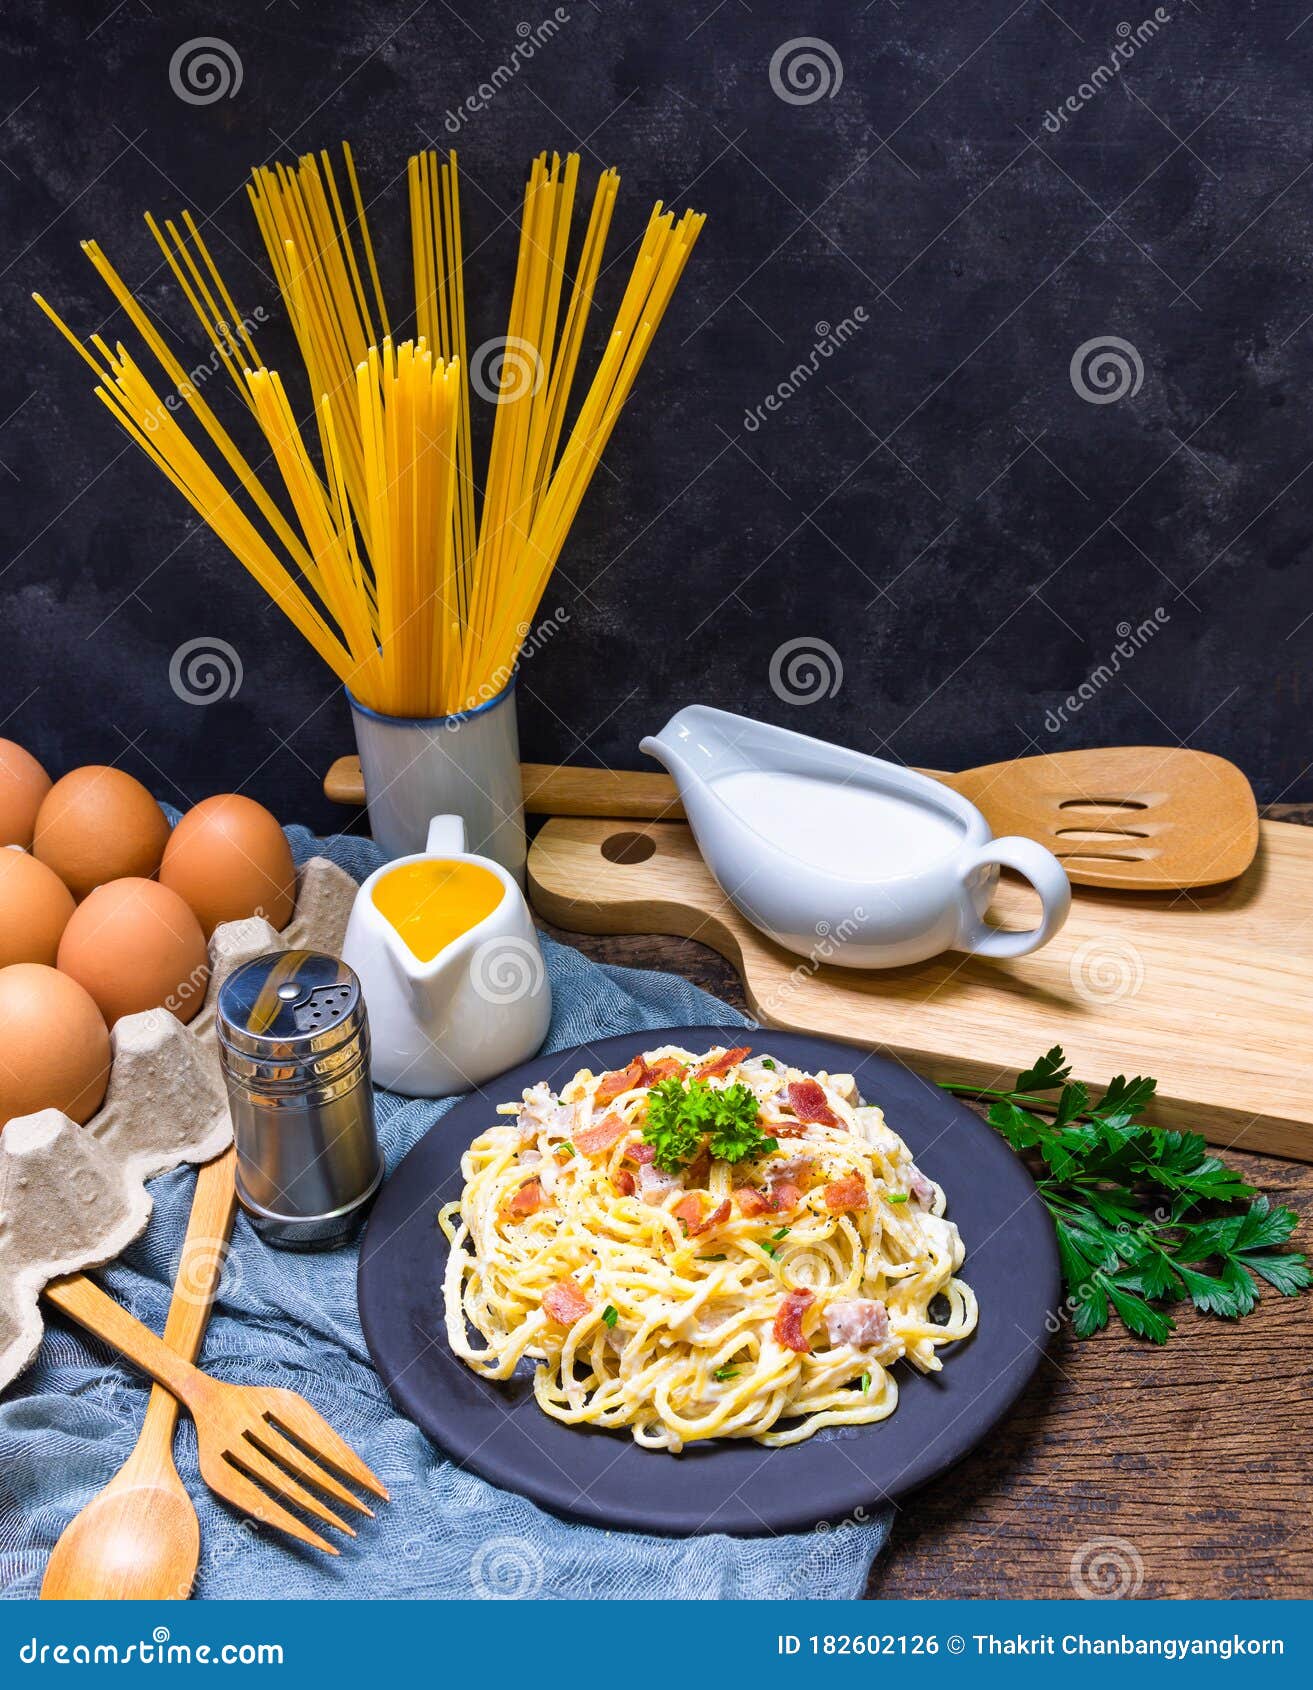 carbonara spaghetti with ingredients and tools